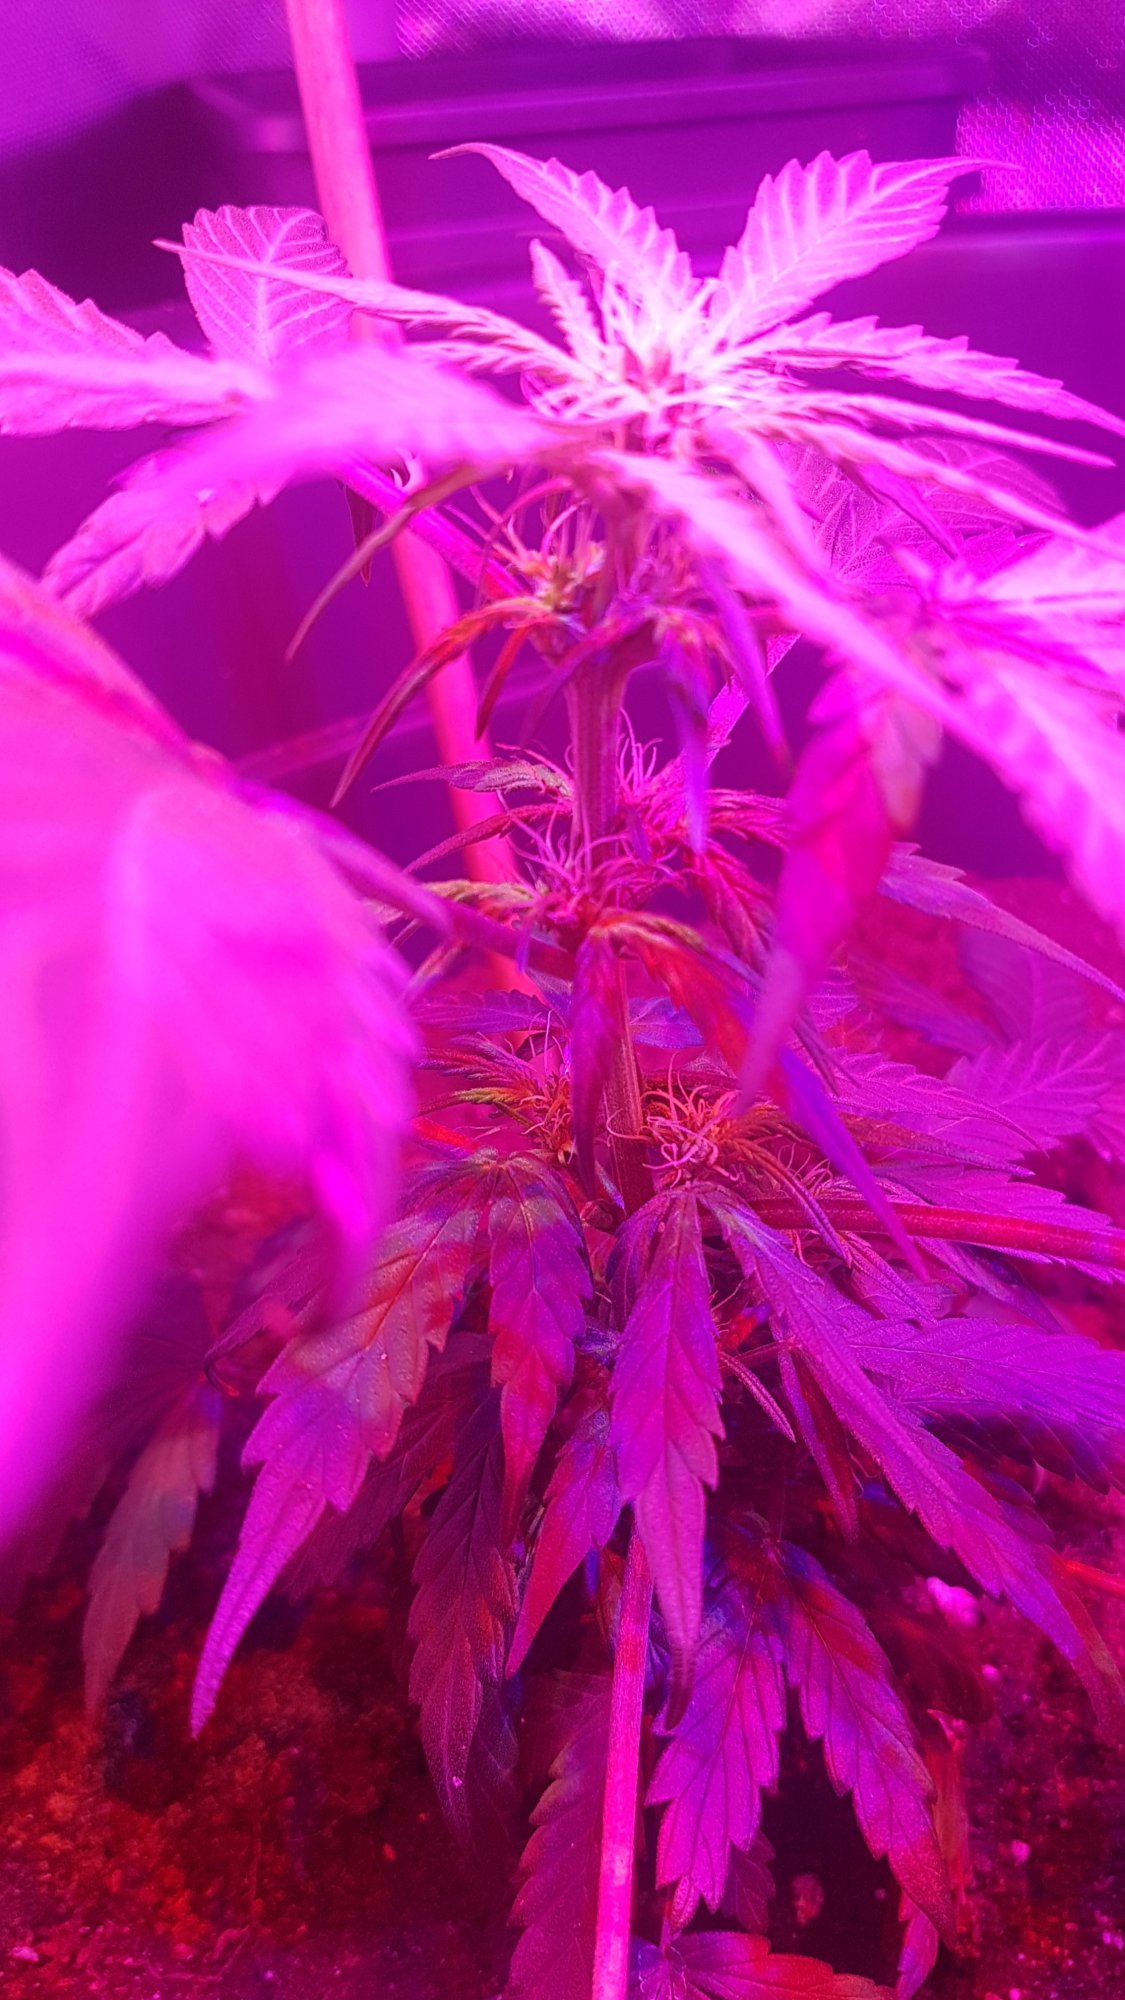 Blue cheese bud in veg stage stump growth 3